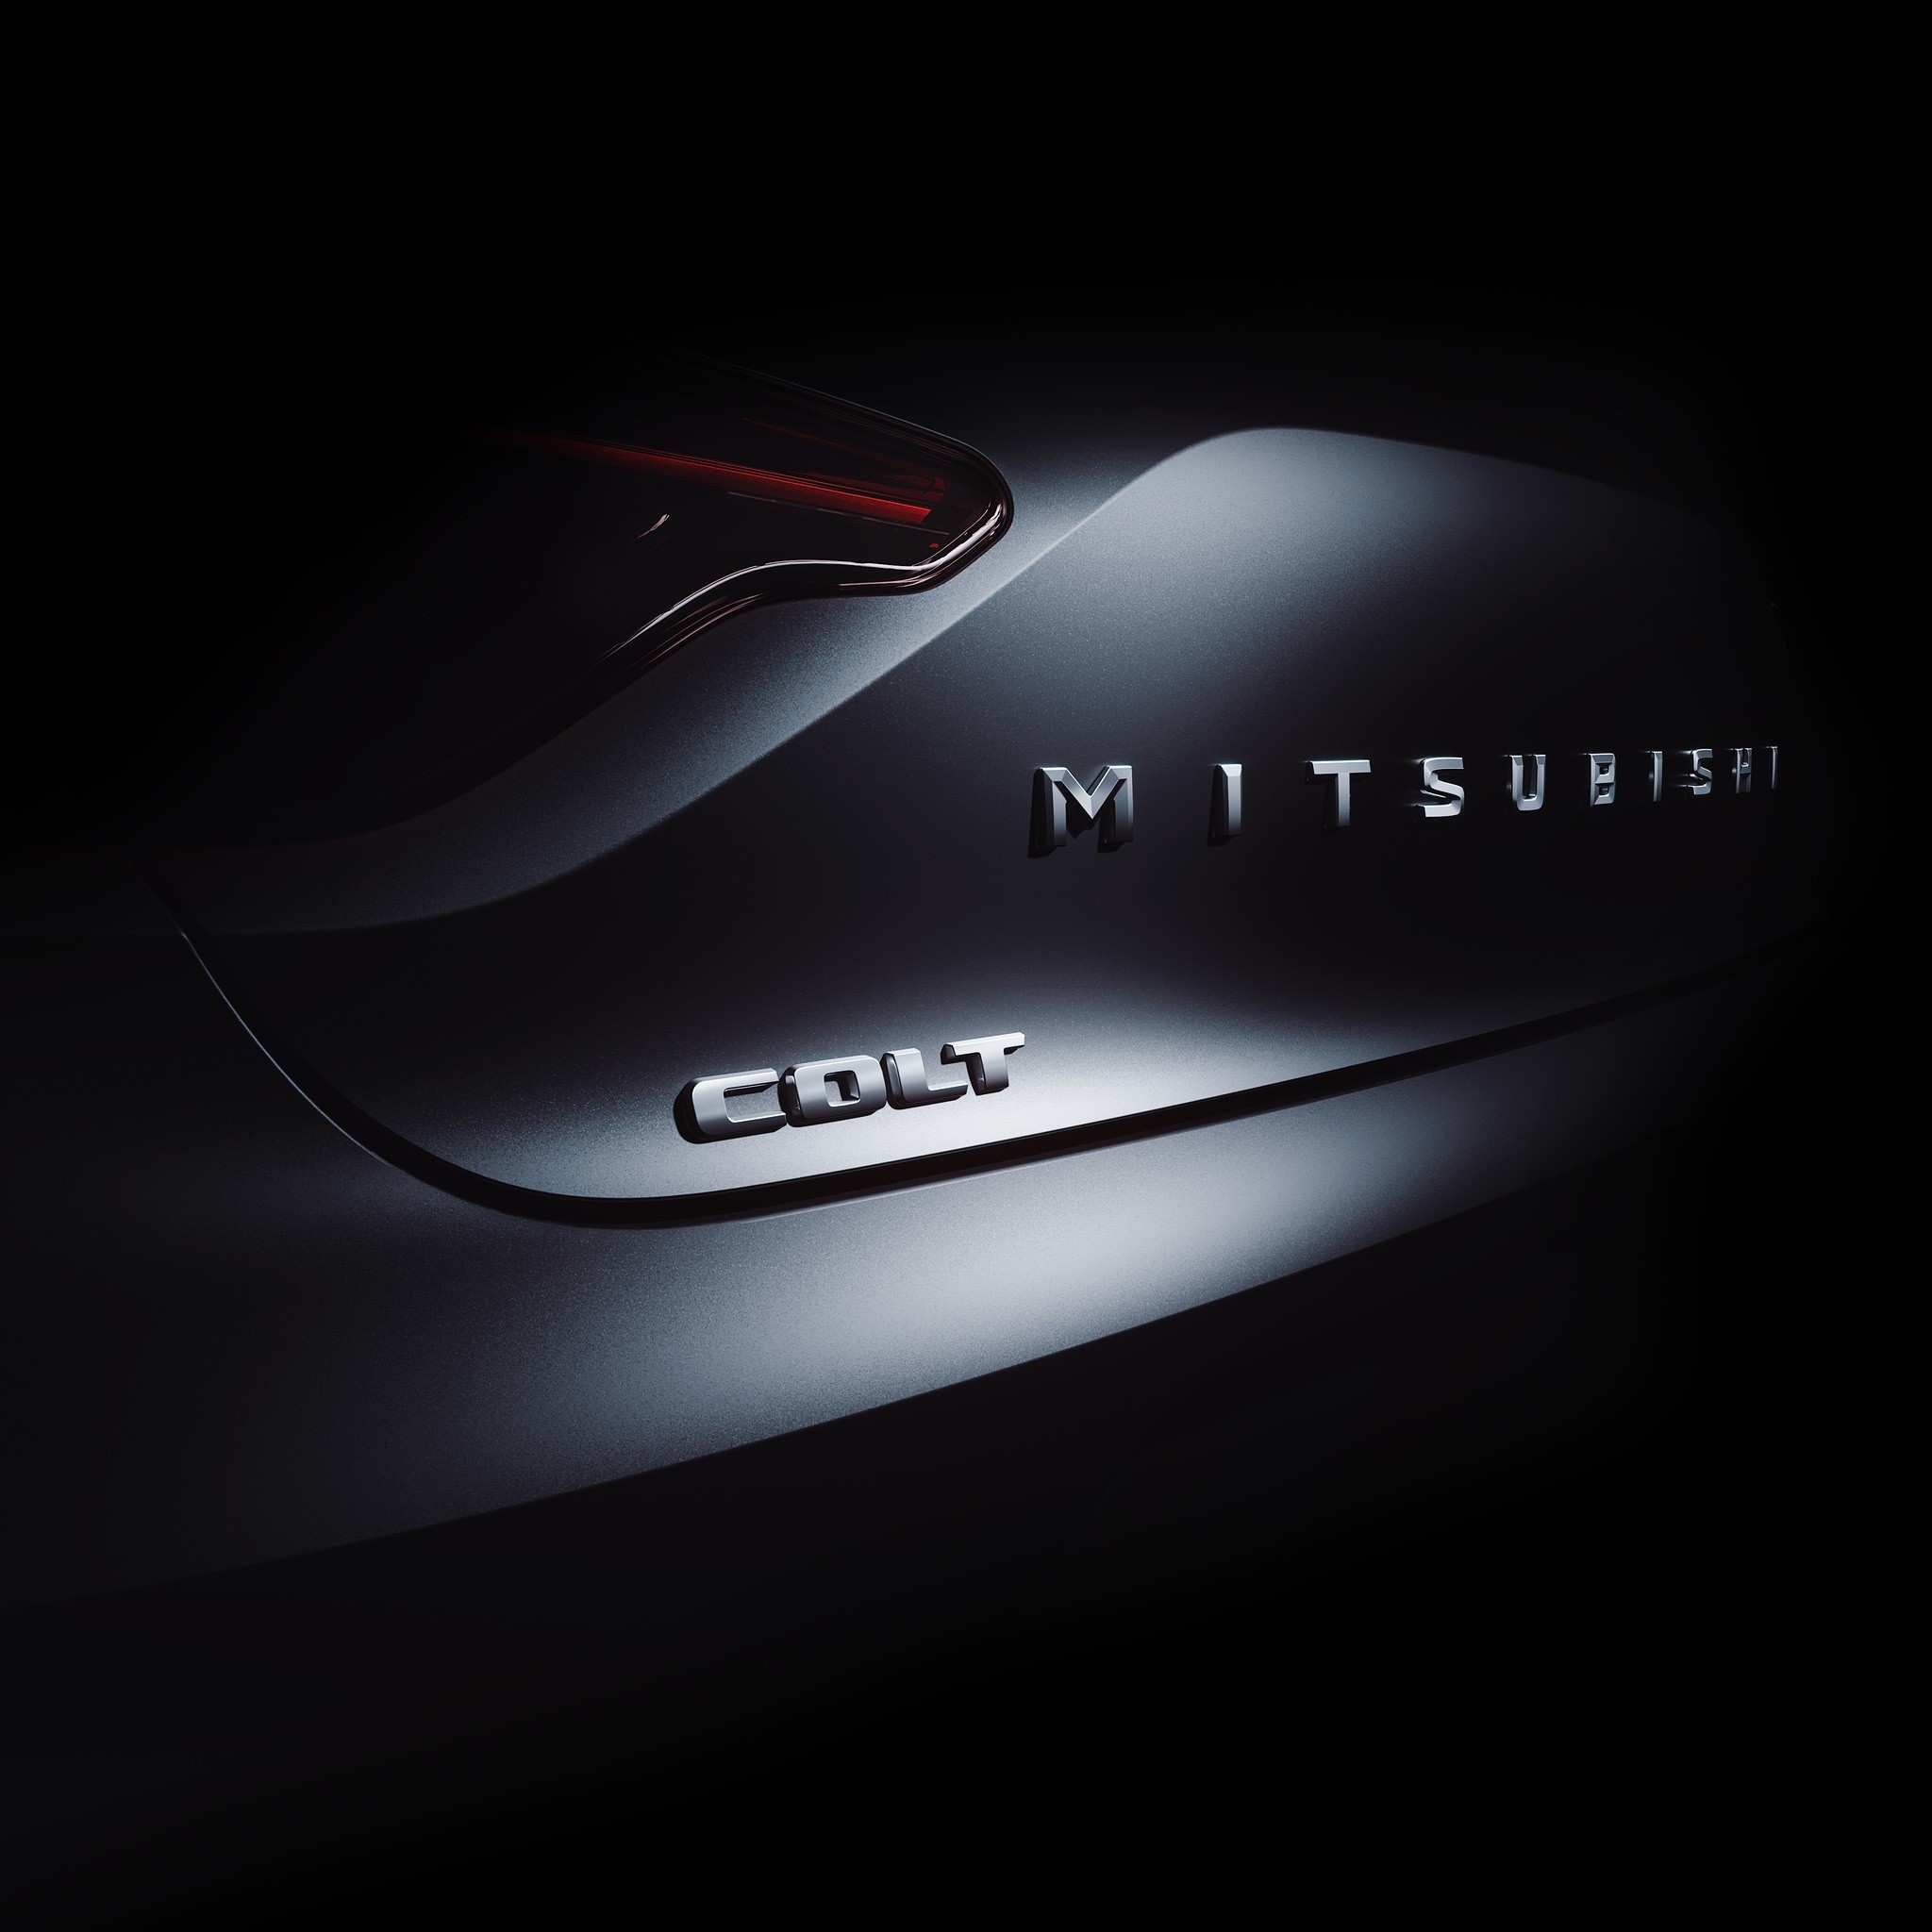 New Mitsubishi Colt Teased Ahead of June Debut, Will Be a Badge-Engineered  Clio - autoevolution